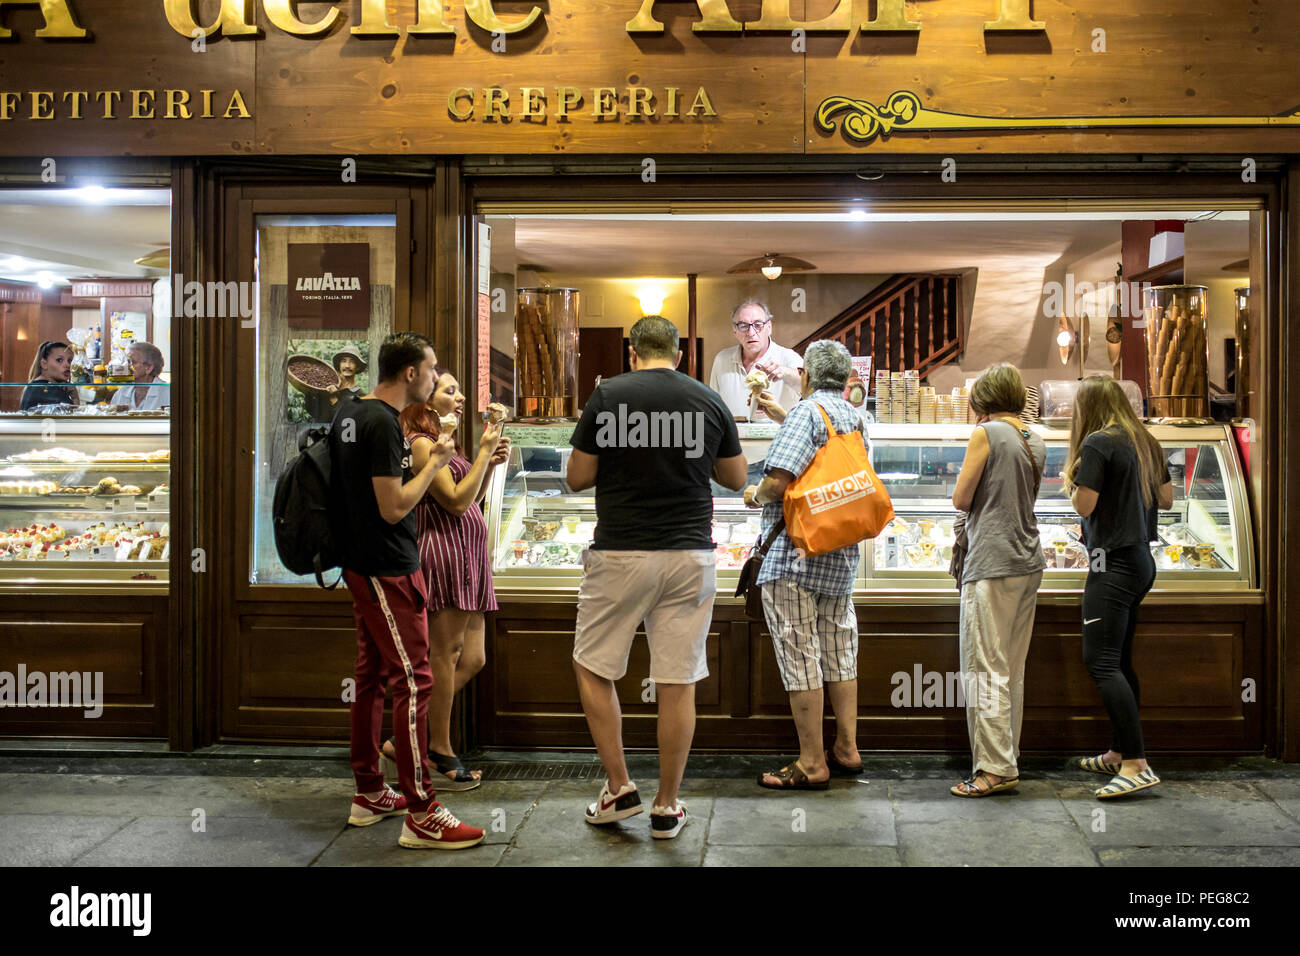 TURIN, ITALY - AUGUST 10, 2018: Group of people buying and tasting traditional italian ice cream in Turin, Italy. Stock Photo